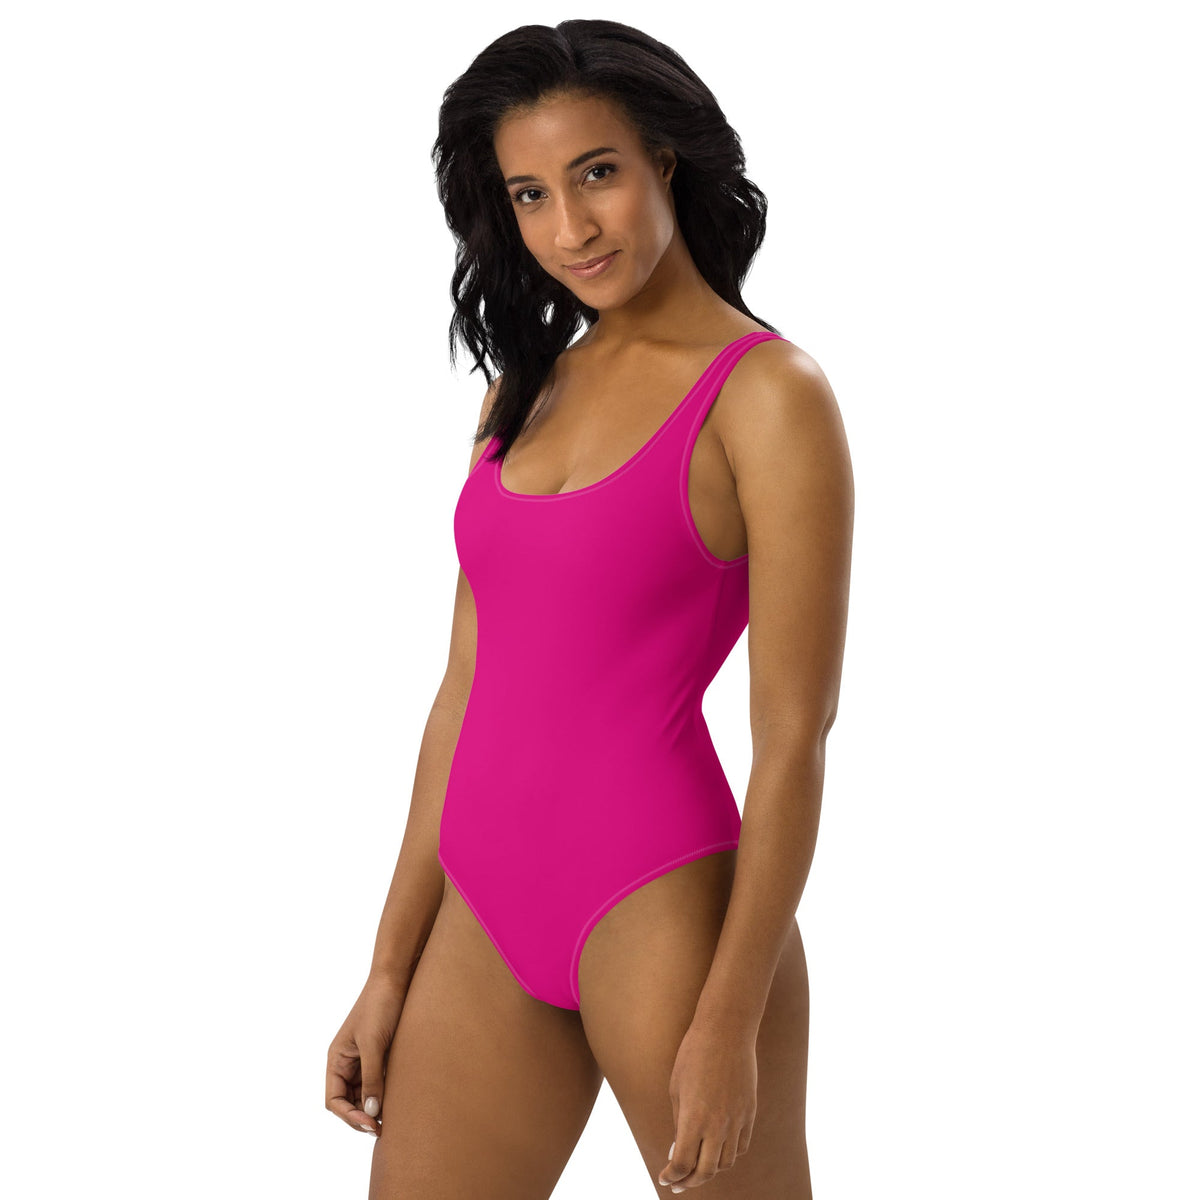 FLORIDA ECO ONE PIECE SWIMSUIT - SPRING PINK